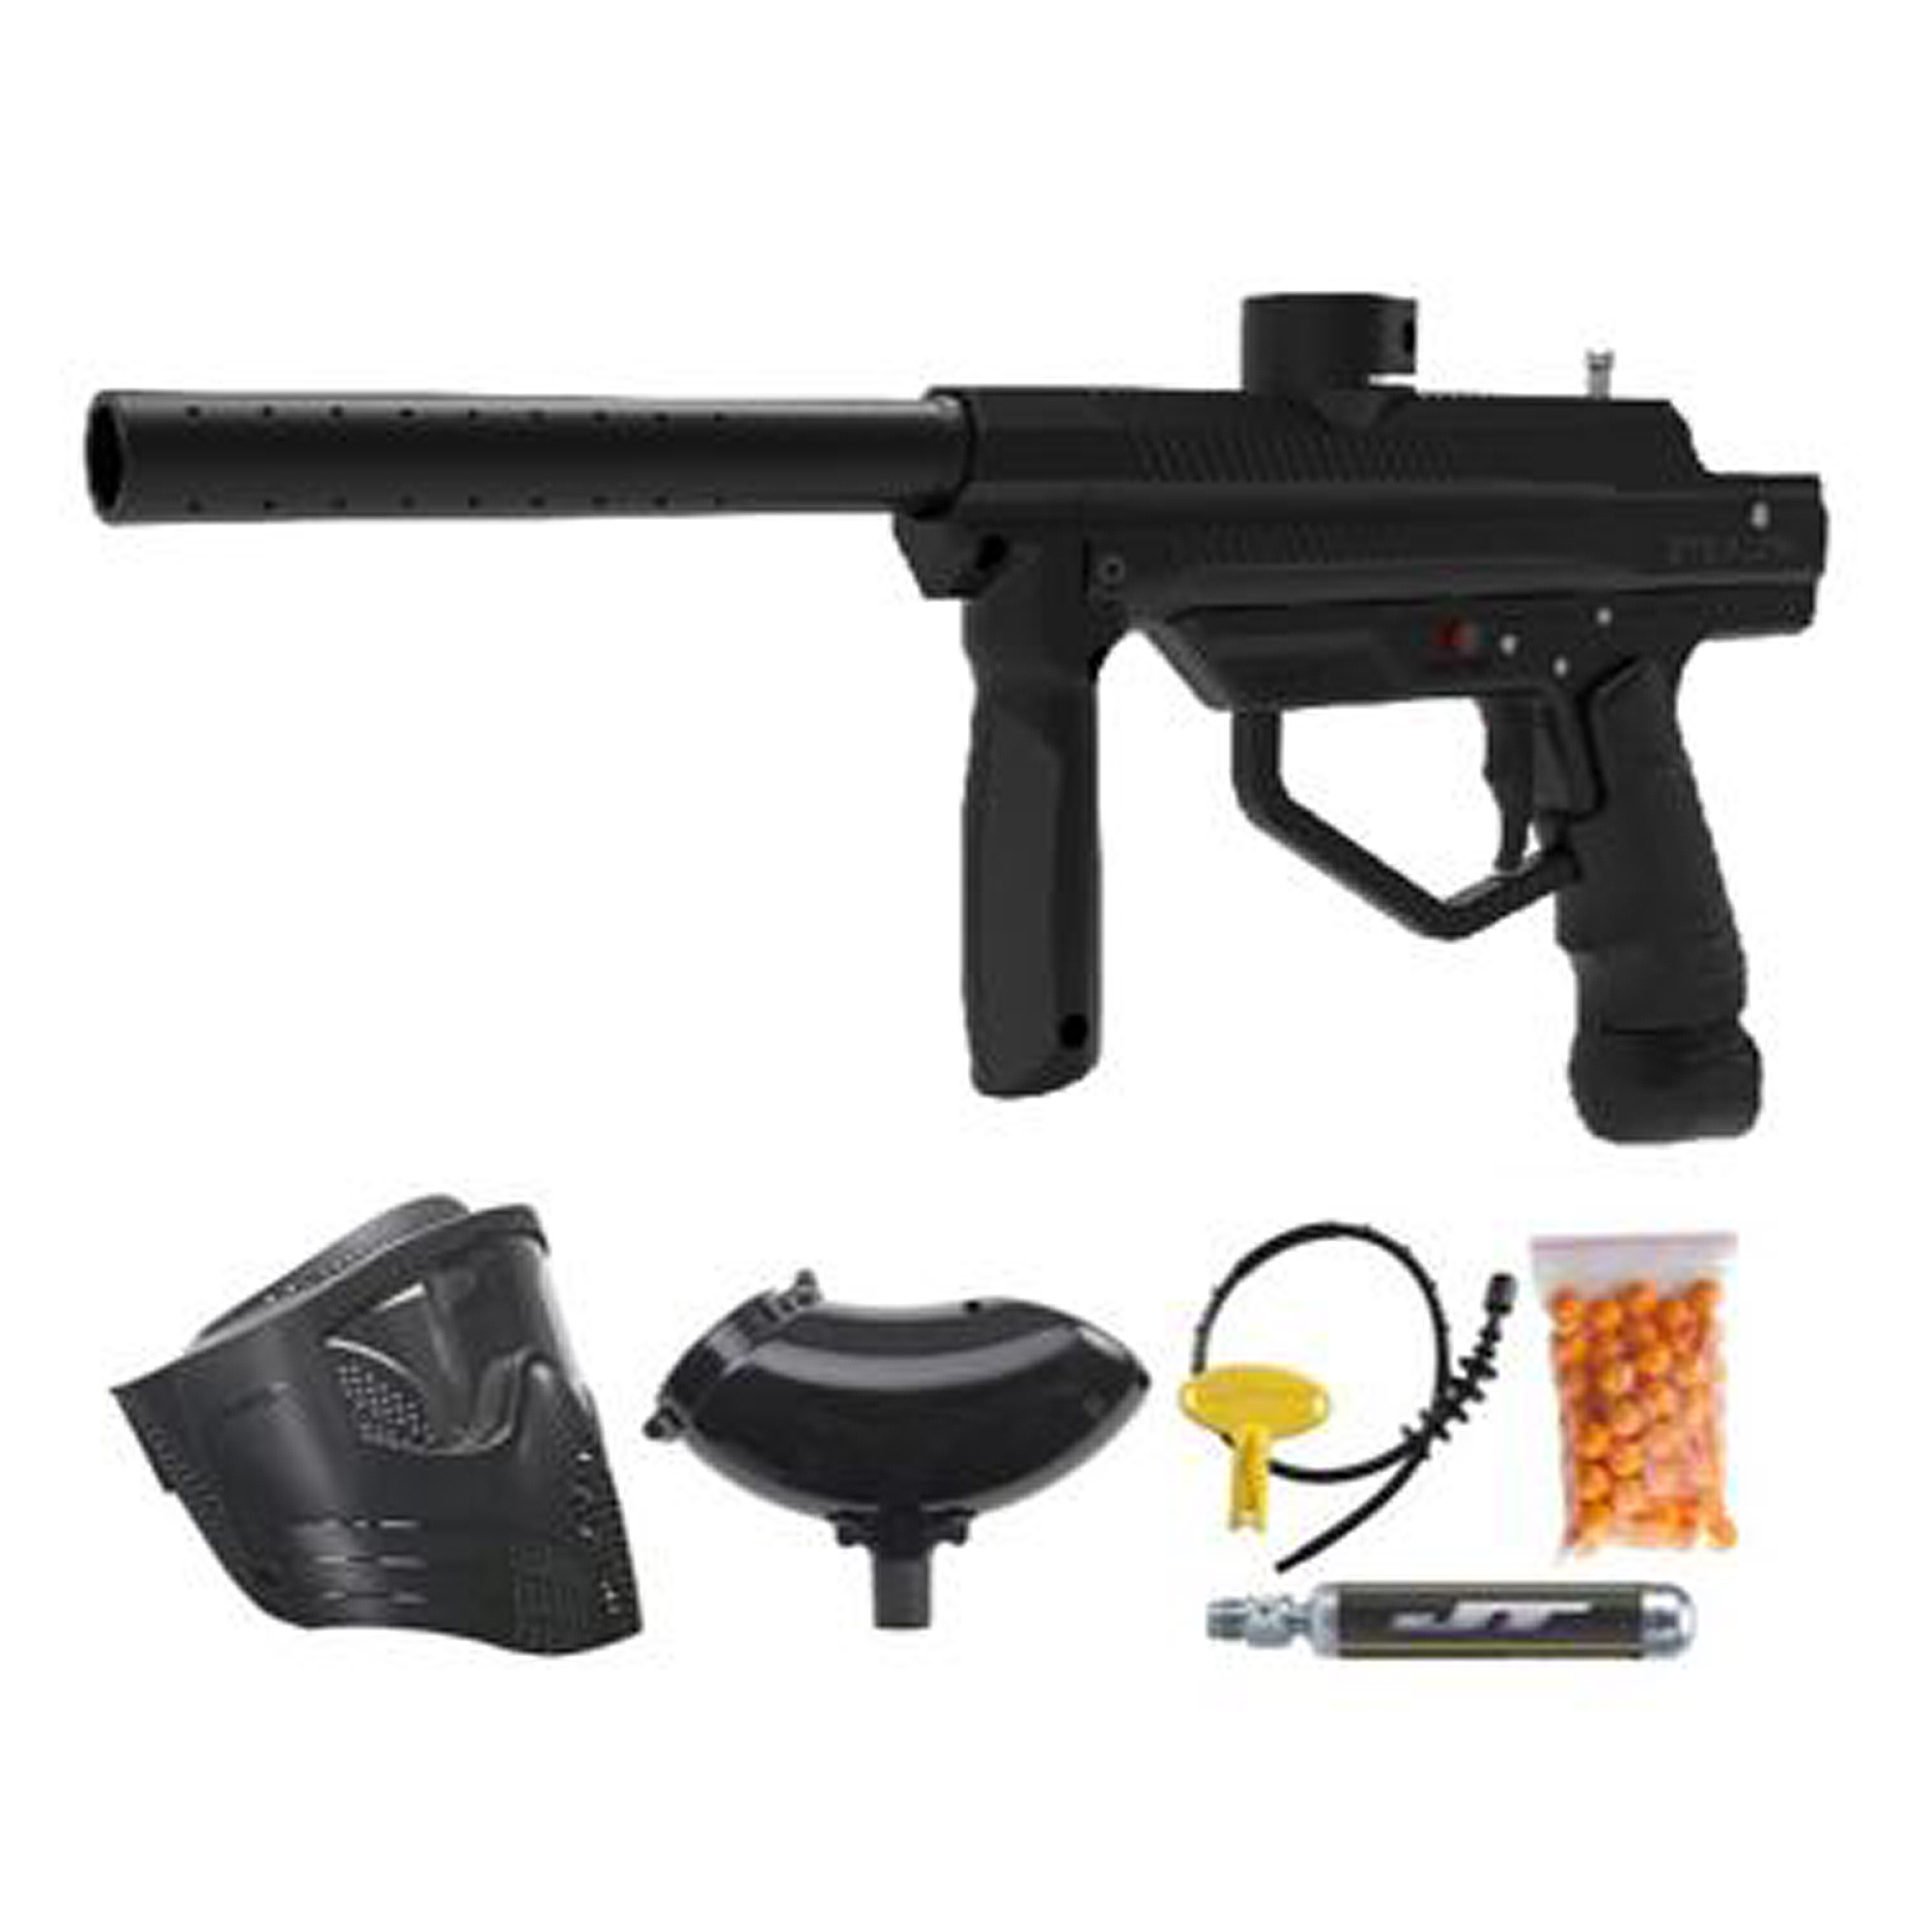 JT Stealth Ready to Play Paintball Marker Gun Kit includes Goggle, Hopper, Squeegee, 90g CO2 and Adapter - image 1 of 8